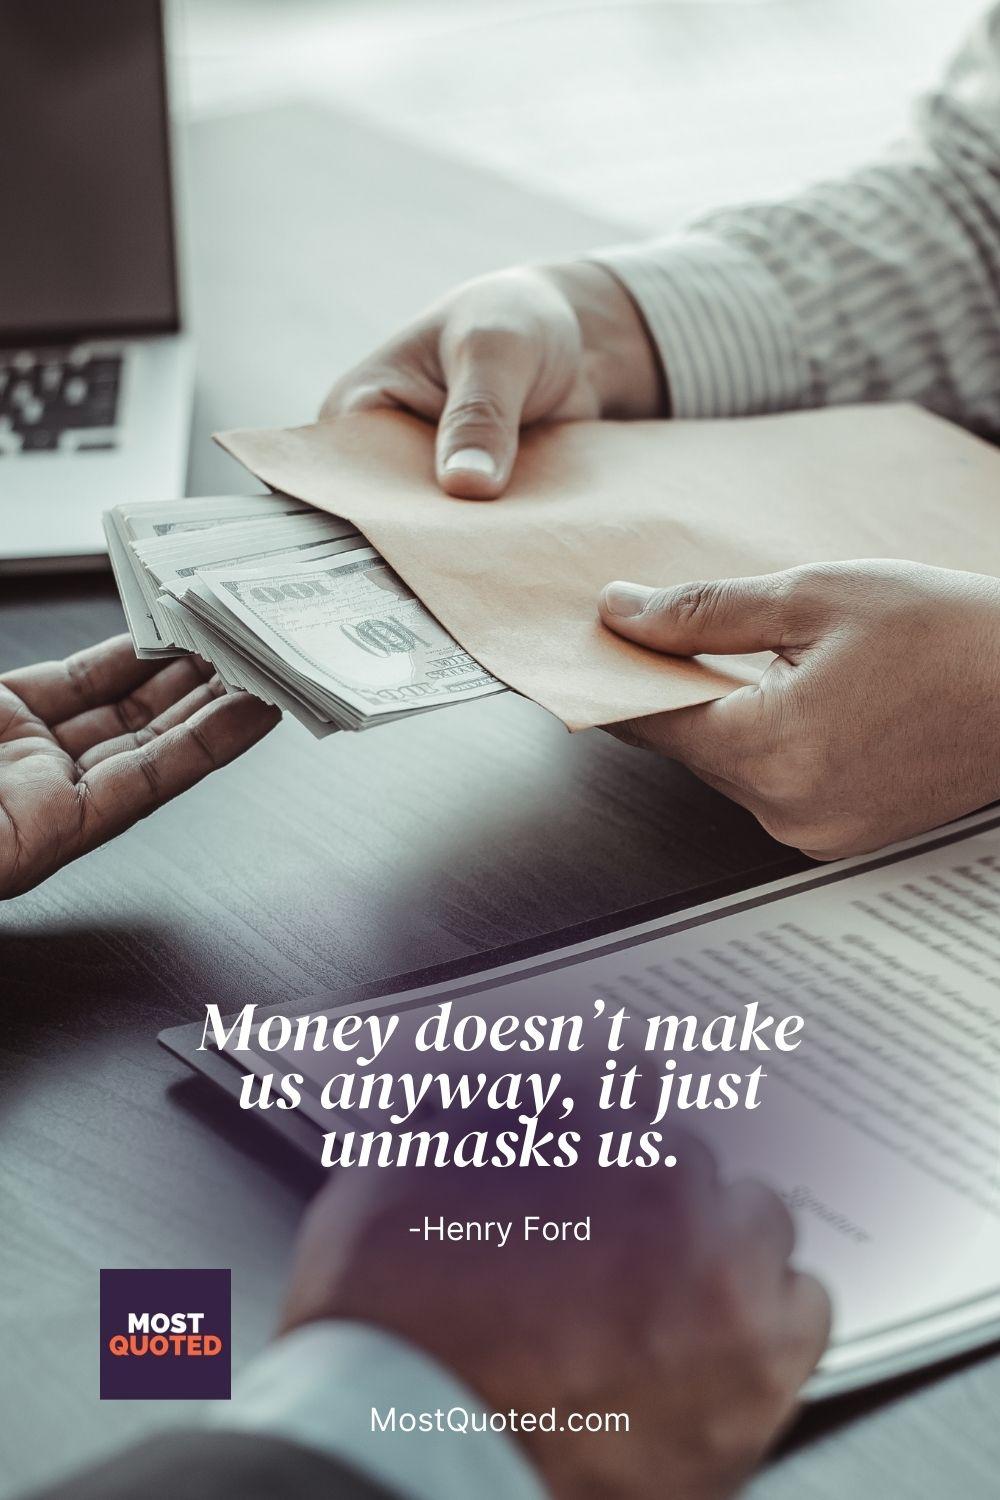 Money doesn’t make us anyway, it just unmasks us. - Henry Ford